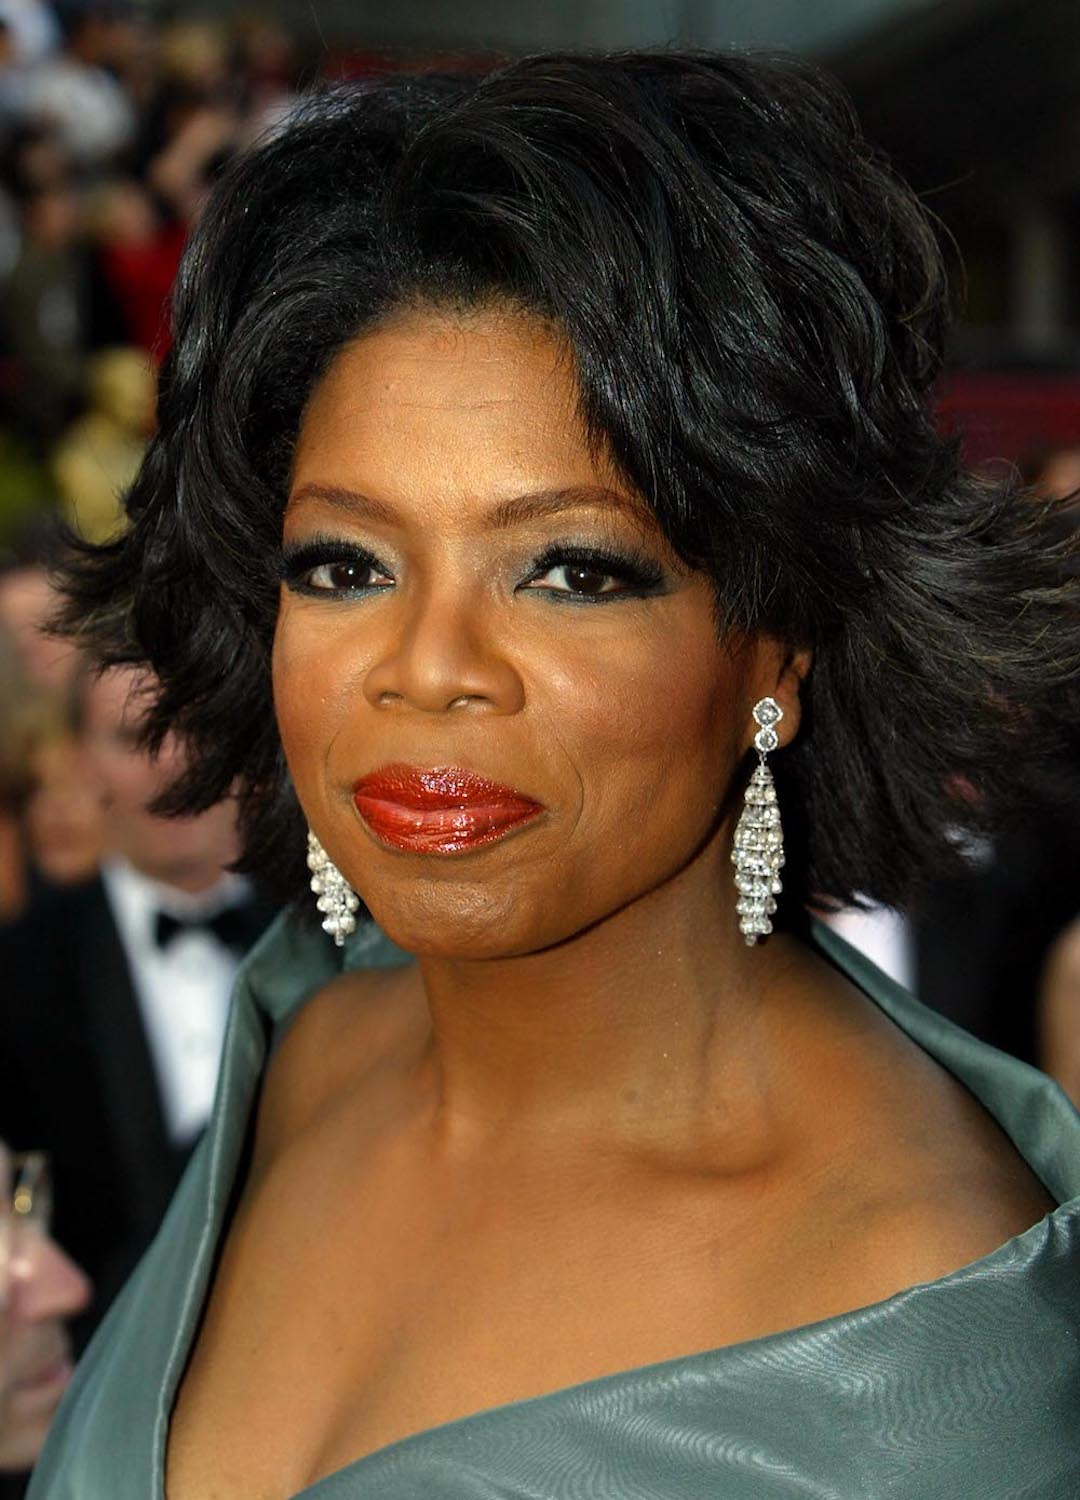 Oprah Winfrey attends the 76th Annual Academy Awards at the Kodak Theater on February 29, 2004 in Hollywood, California